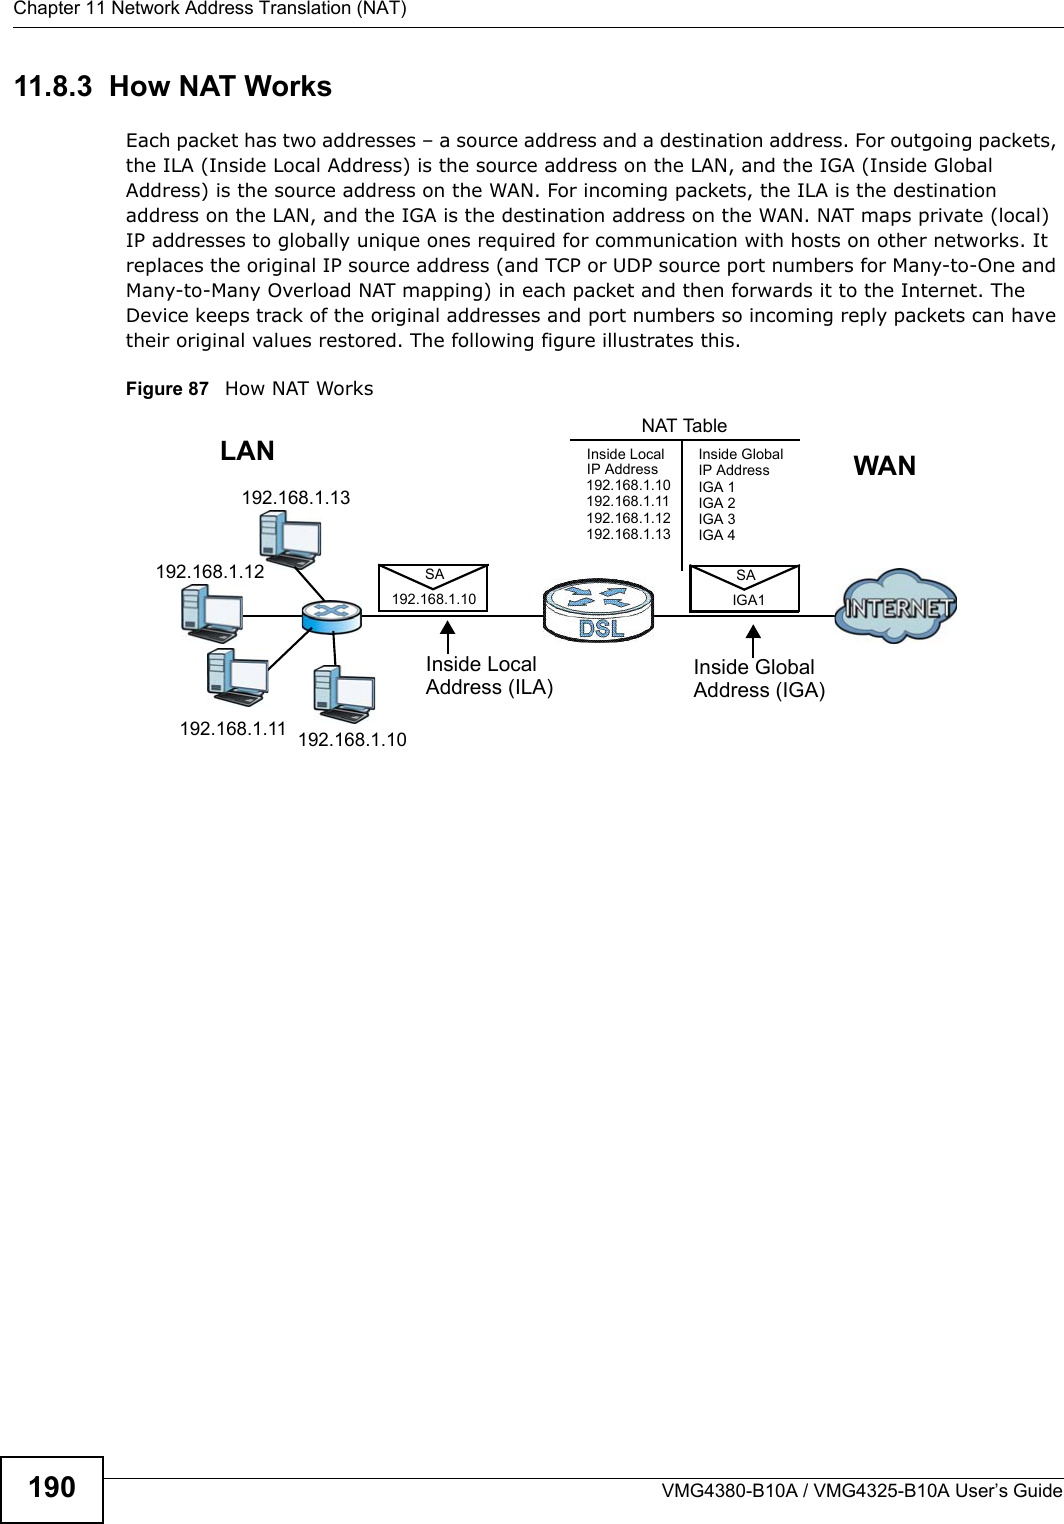 Chapter 11 Network Address Translation (NAT)VMG4380-B10A / VMG4325-B10A User’s Guide19011.8.3  How NAT WorksEach packet has two addresses – a source address and a destination address. For outgoing packets, the ILA (Inside Local Address) is the source address on the LAN, and the IGA (Inside Global Address) is the source address on the WAN. For incoming packets, the ILA is the destination address on the LAN, and the IGA is the destination address on the WAN. NAT maps private (local) IP addresses to globally unique ones required for communication with hosts on other networks. It replaces the original IP source address (and TCP or UDP source port numbers for Many-to-One and Many-to-Many Overload NAT mapping) in each packet and then forwards it to the Internet. The Device keeps track of the original addresses and port numbers so incoming reply packets can have their original values restored. The following figure illustrates this.Figure 87   How NAT Works192.168.1.13192.168.1.10192.168.1.11192.168.1.12 SA192.168.1.10SAIGA1Inside LocalIP Address192.168.1.10192.168.1.11192.168.1.12192.168.1.13Inside Global IP AddressIGA 1IGA 2IGA 3IGA 4NAT TableWANLANInside LocalAddress (ILA)Inside GlobalAddress (IGA)